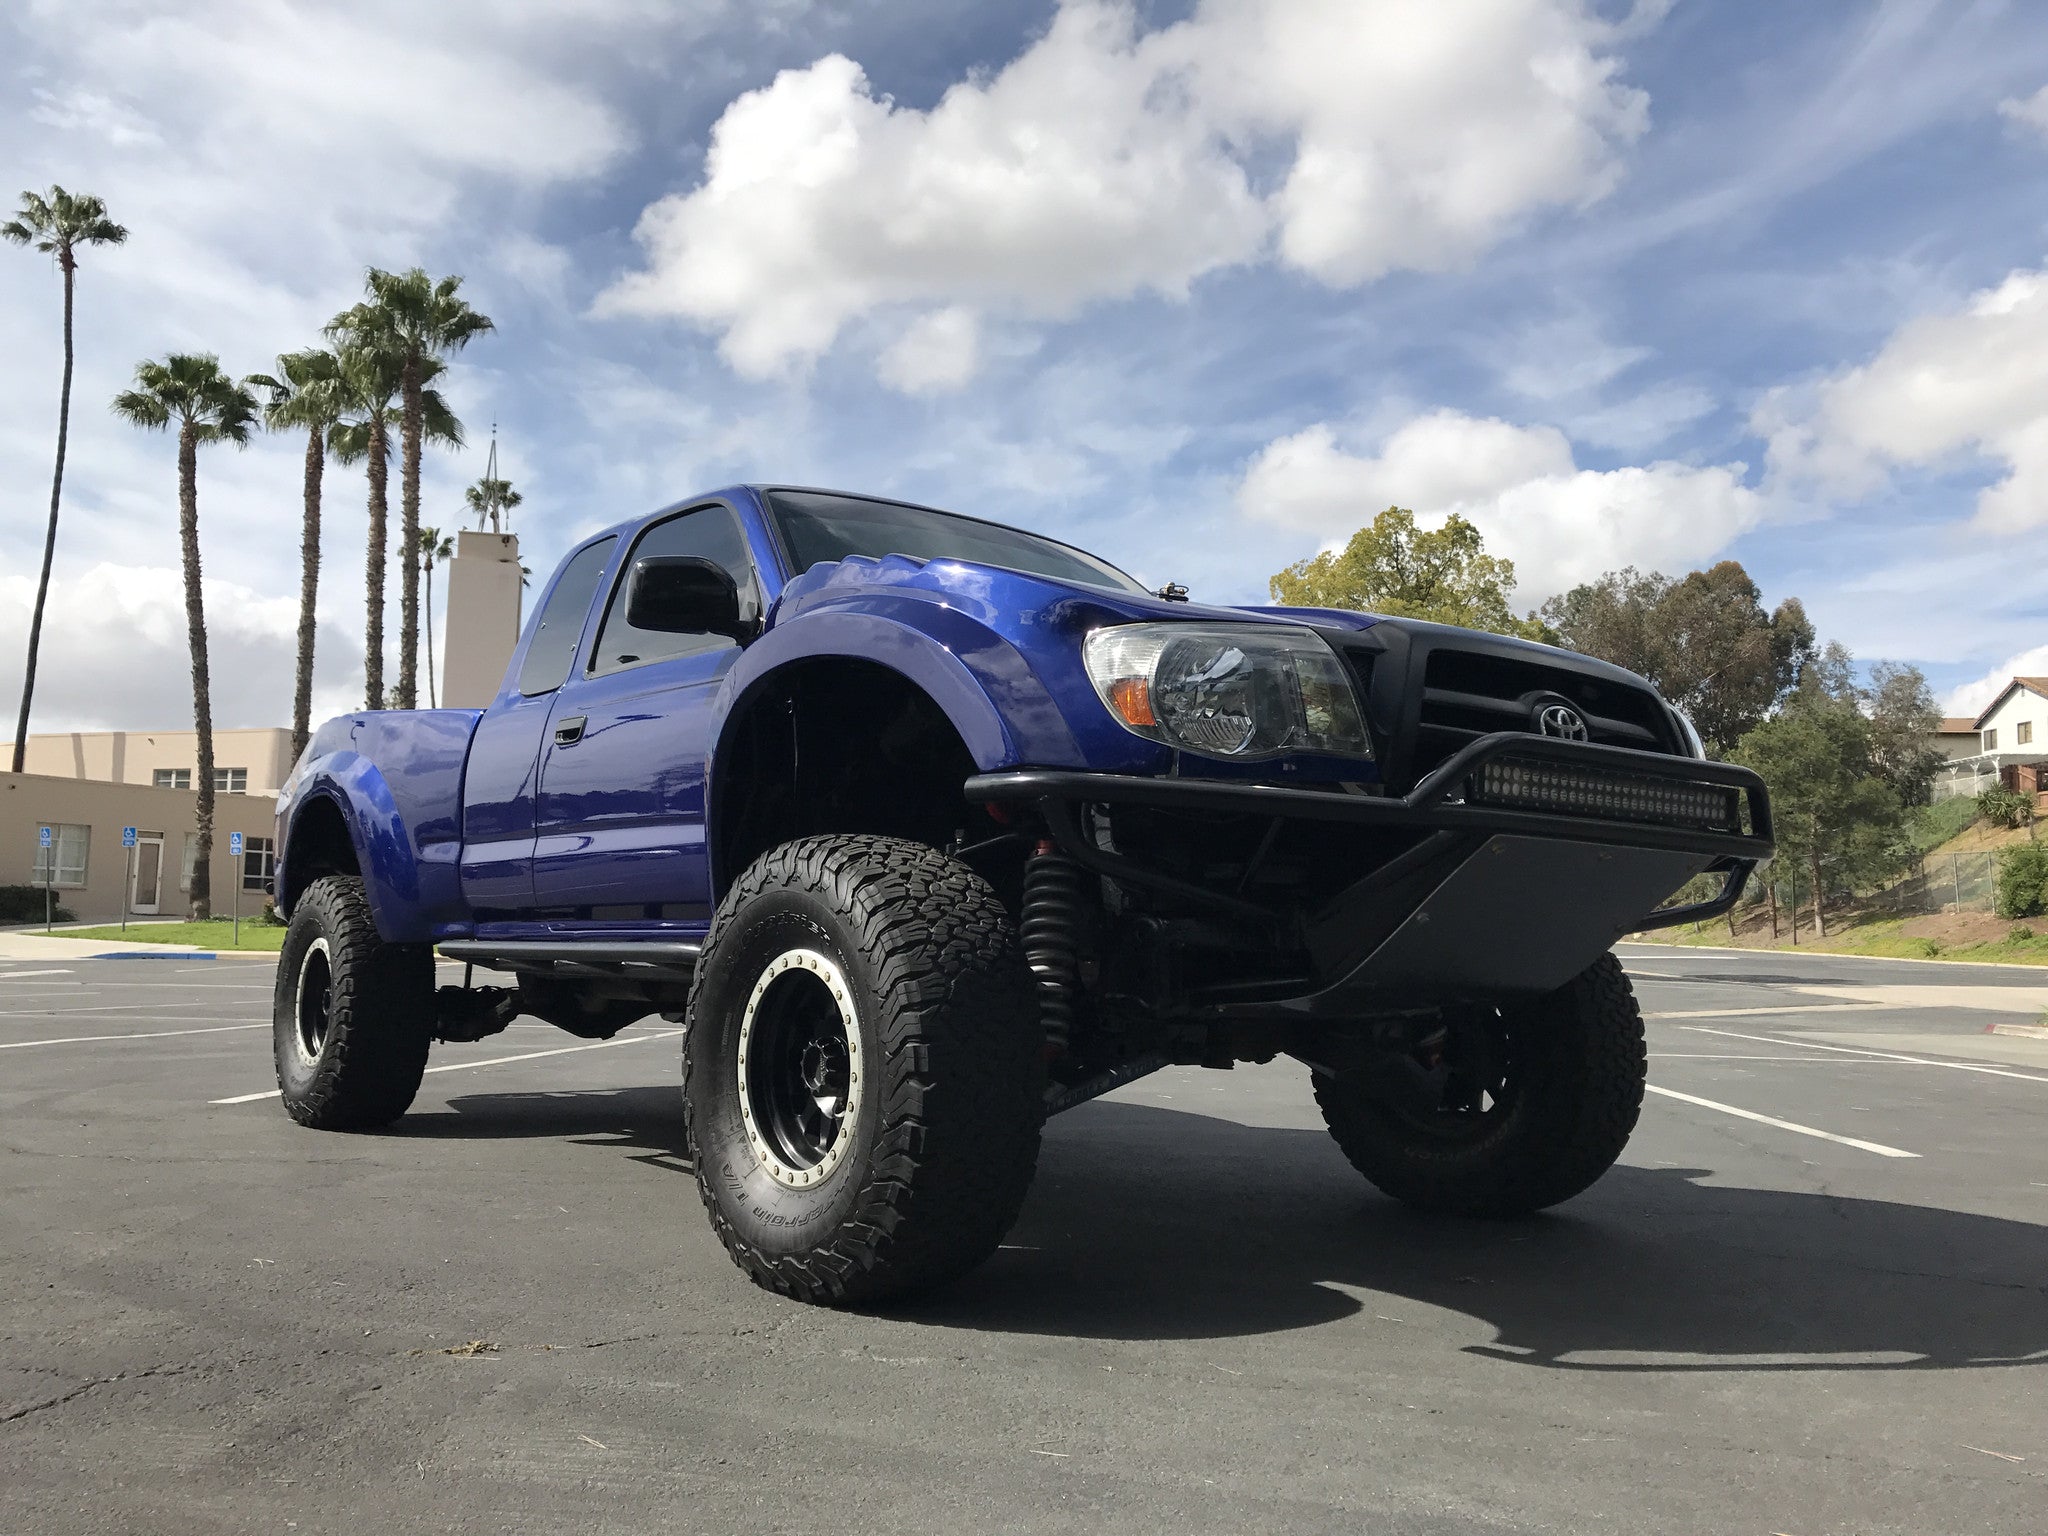 96-04 Toyota Tacoma to 2012 conversion 6" Bulge Off Road Fiberglass Bedsides - McNeil Racing Inc, Bedsides - off road fiberglass fenders, bedsides, hood, one piece, front end, fabrication, conversion